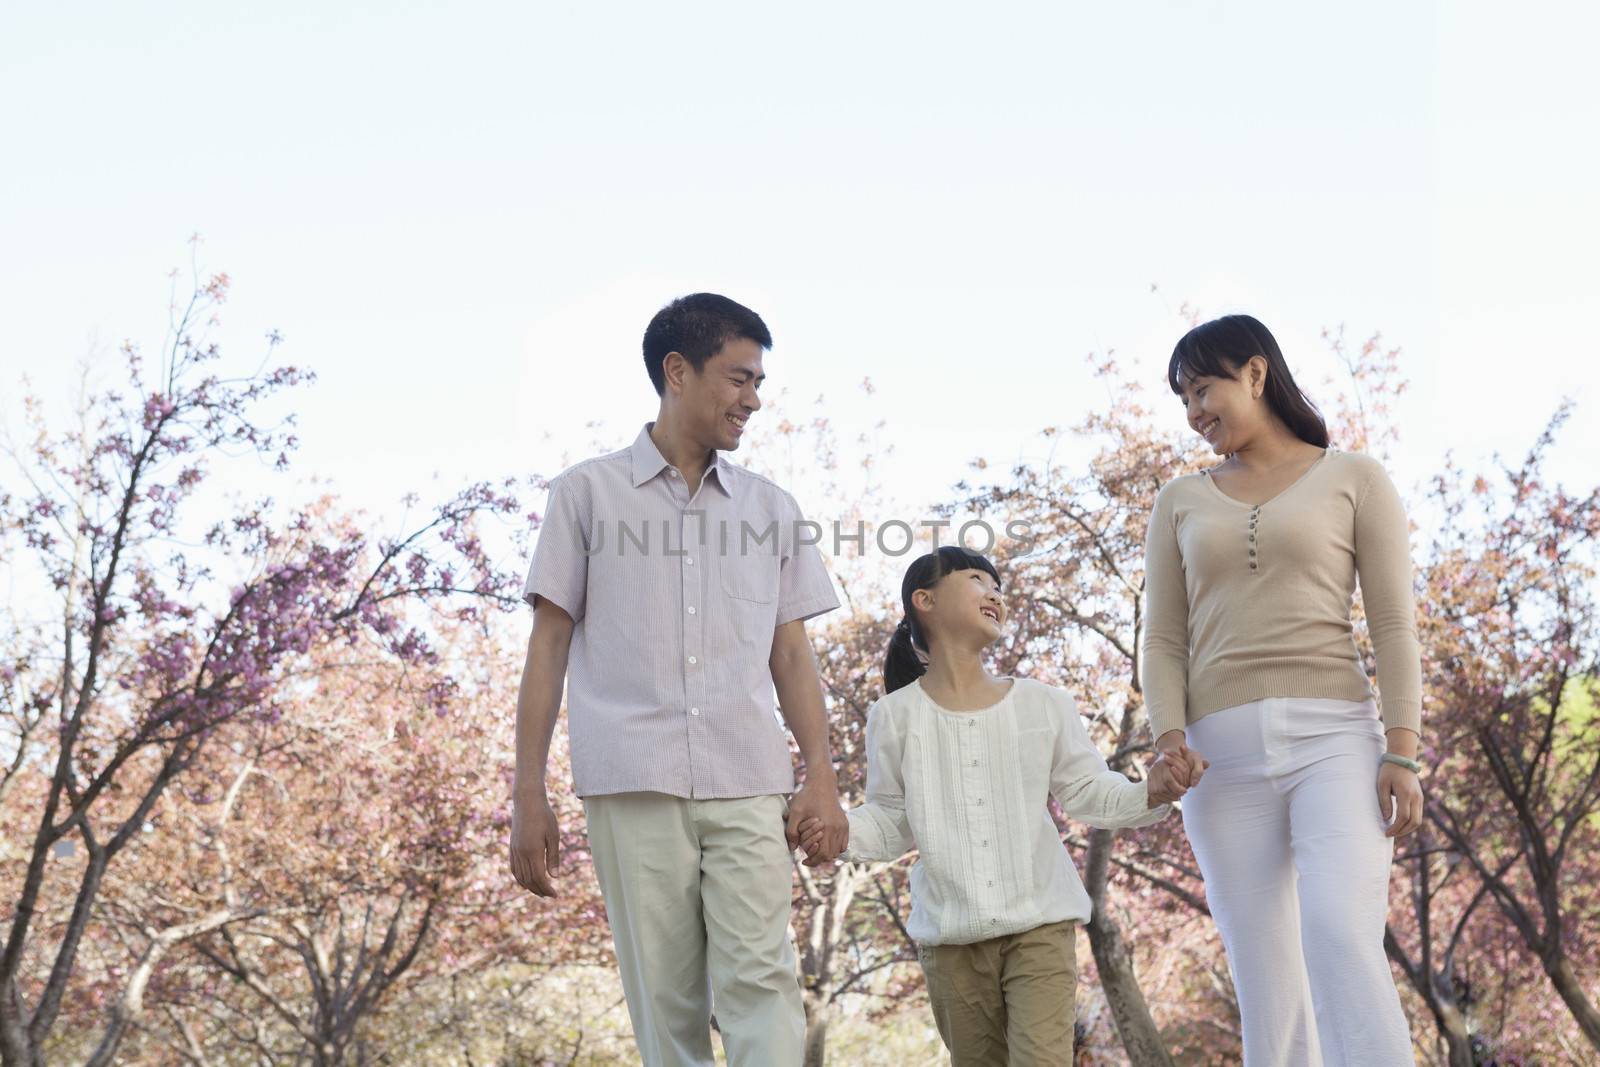 Happy family holding hands and taking a walk amongst the cherry trees in a park in springtime, Beijing